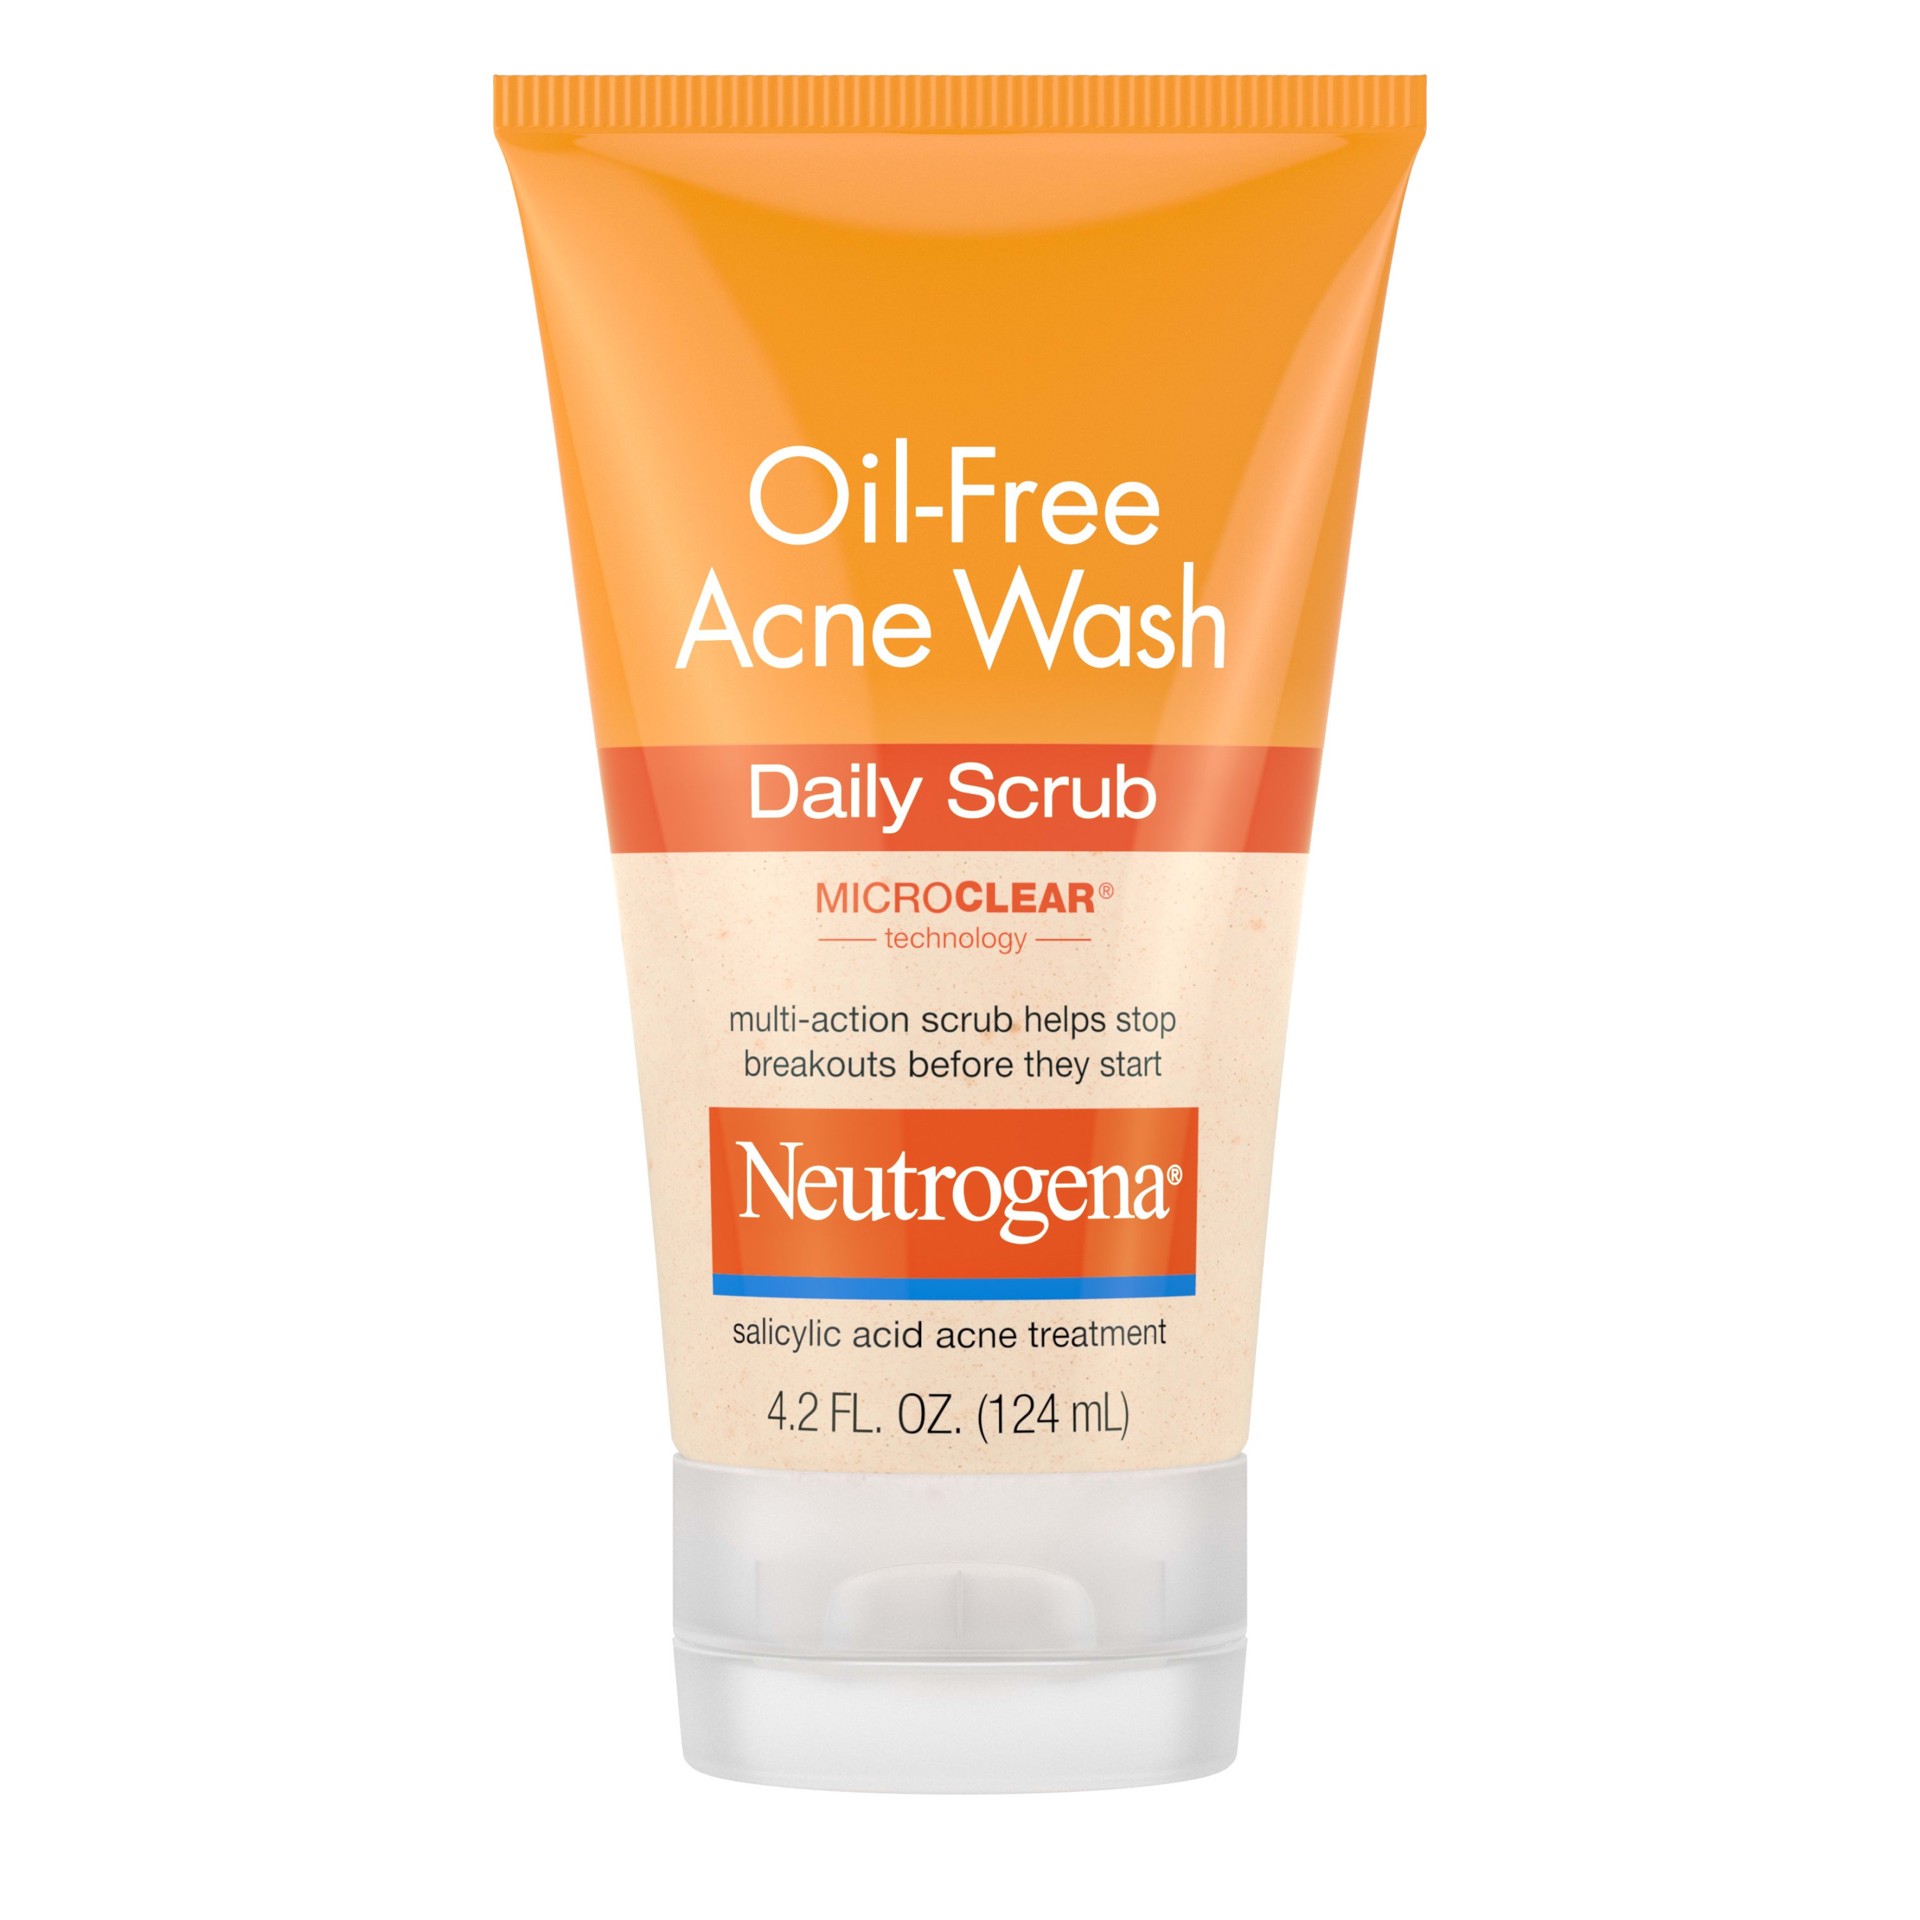 7 face washes for acne-prone skin